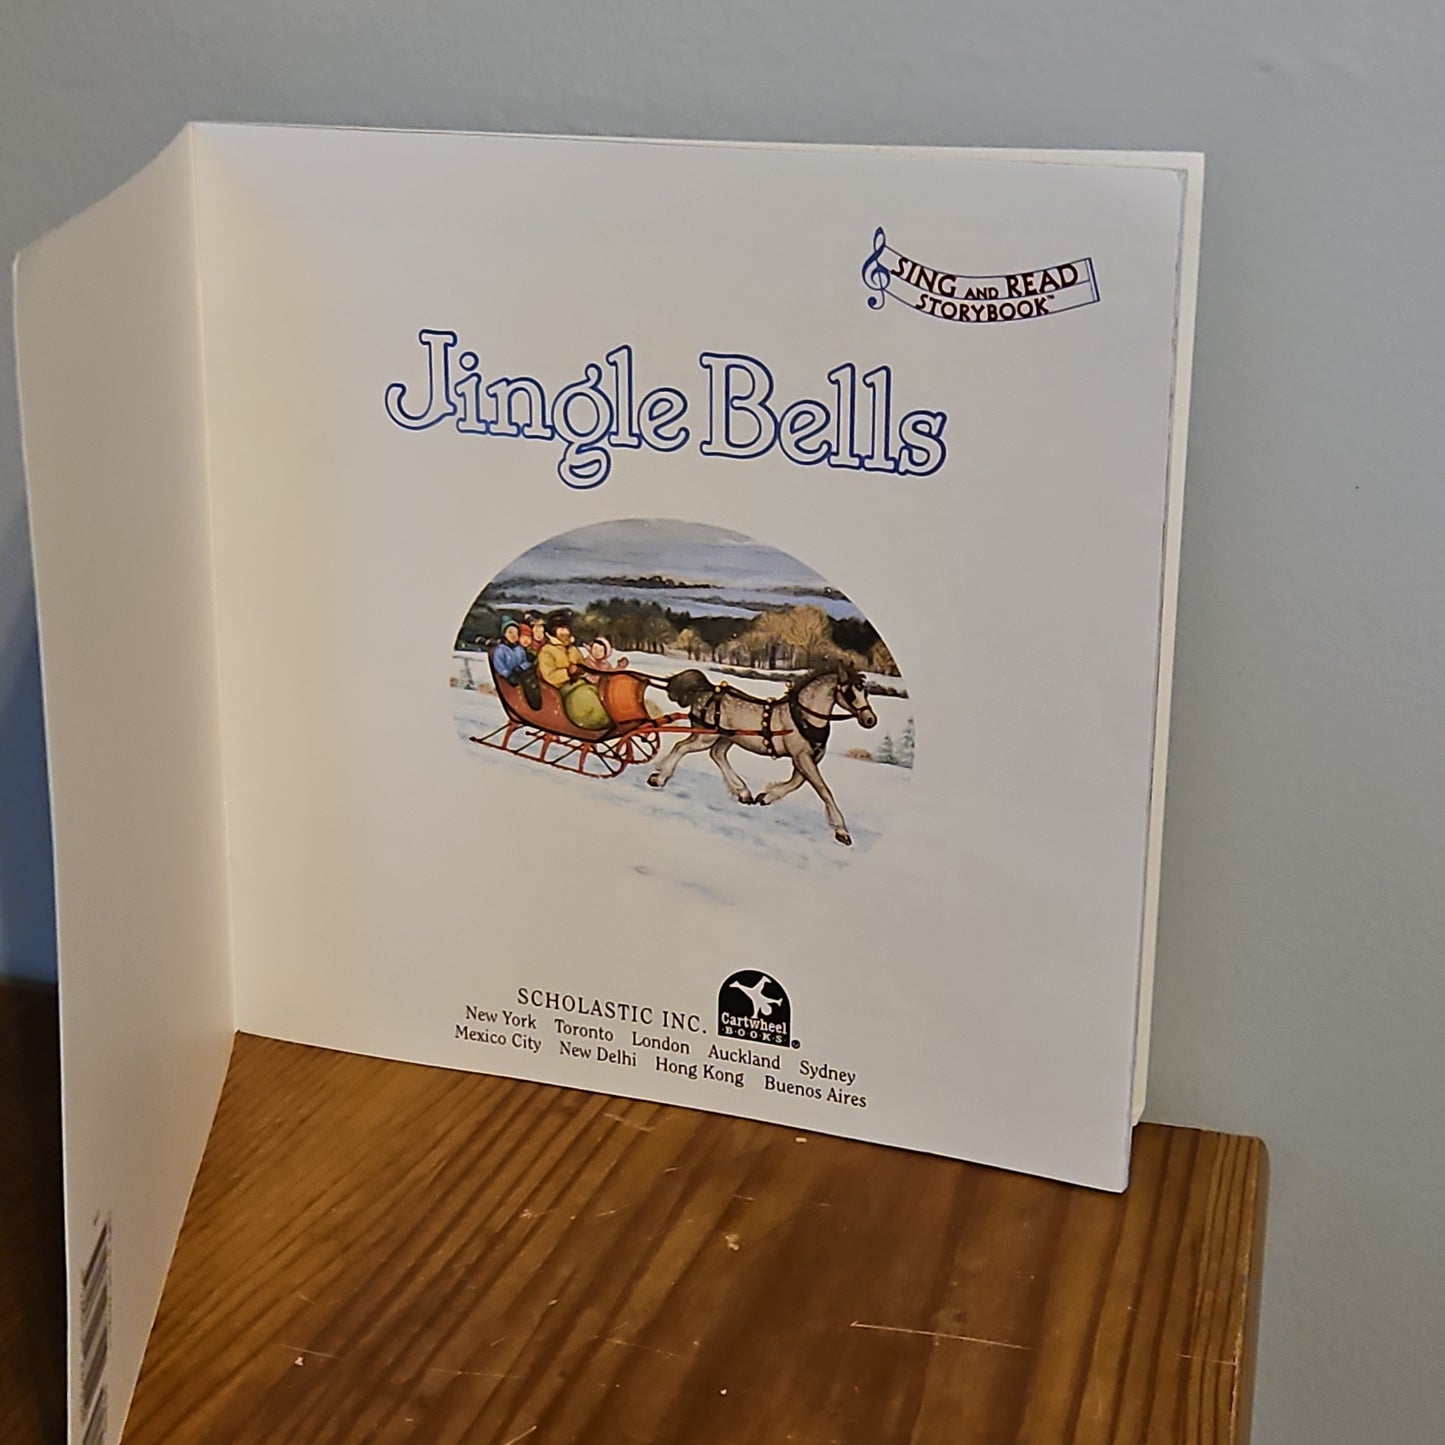 Jingle Bells Illustrated By Darcy May 2001